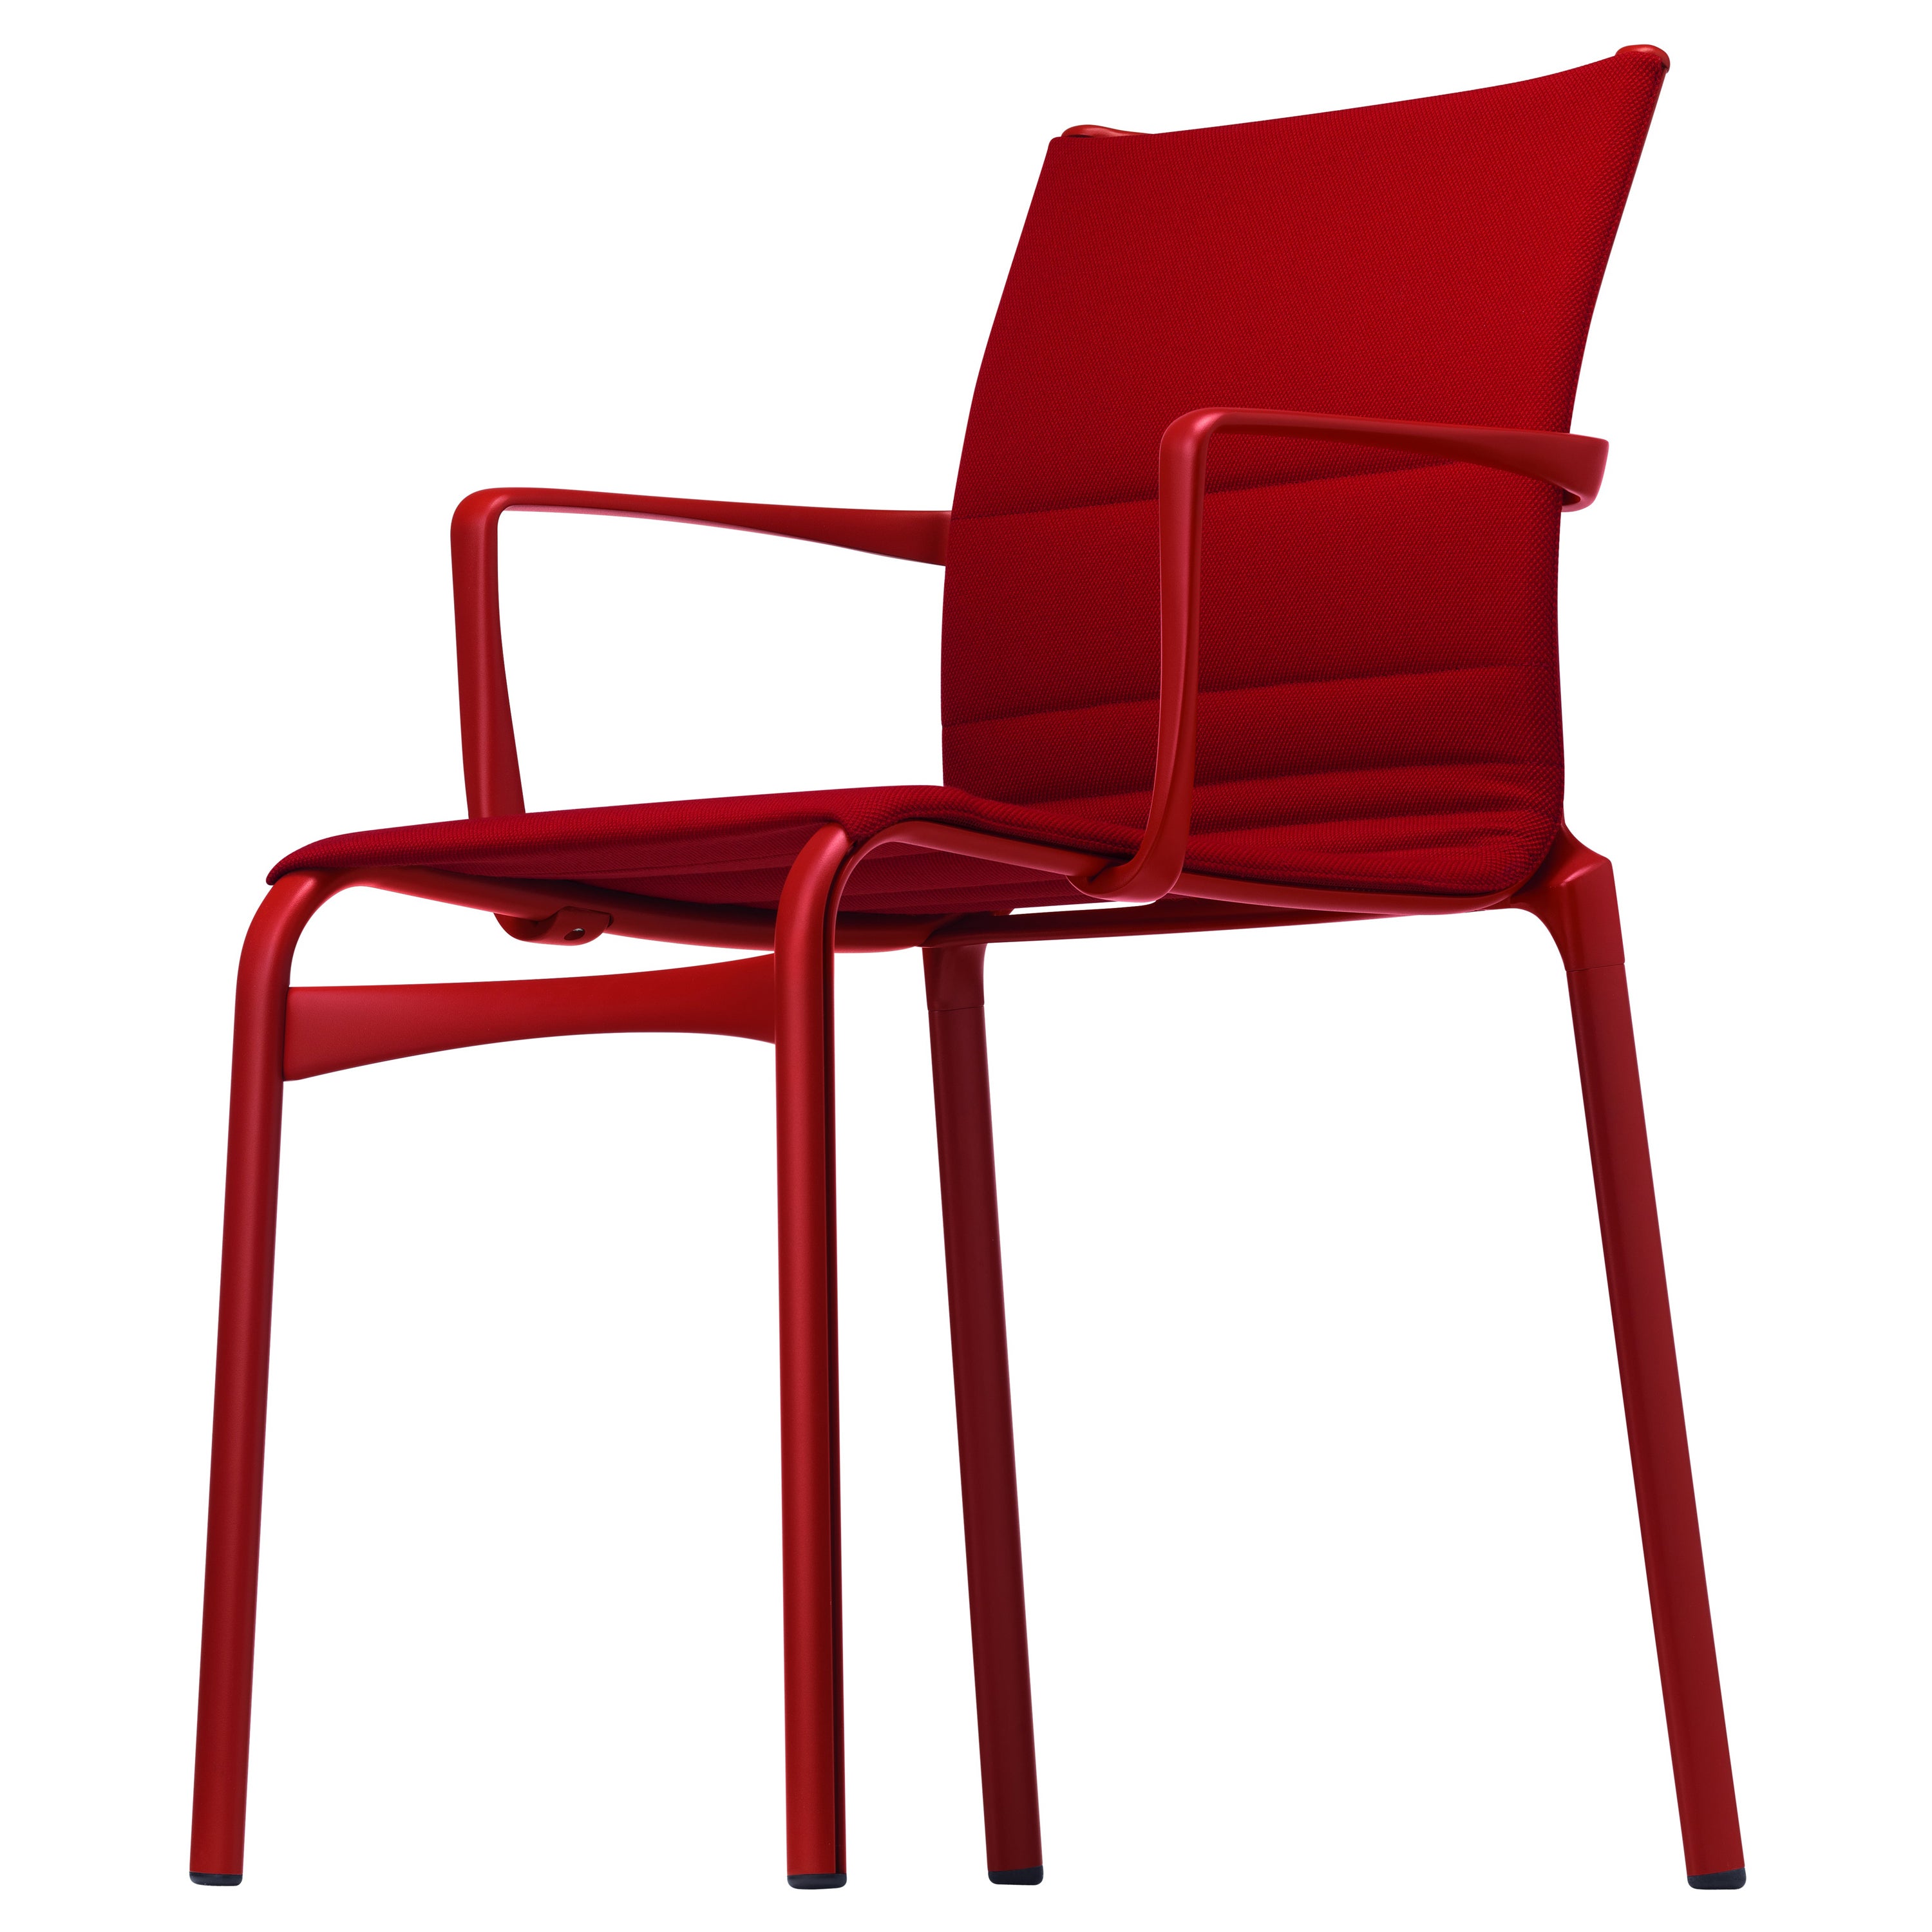 Alias Bigframe 44 Armchair in Red Upholstery with Lacquered Aluminium Frame For Sale